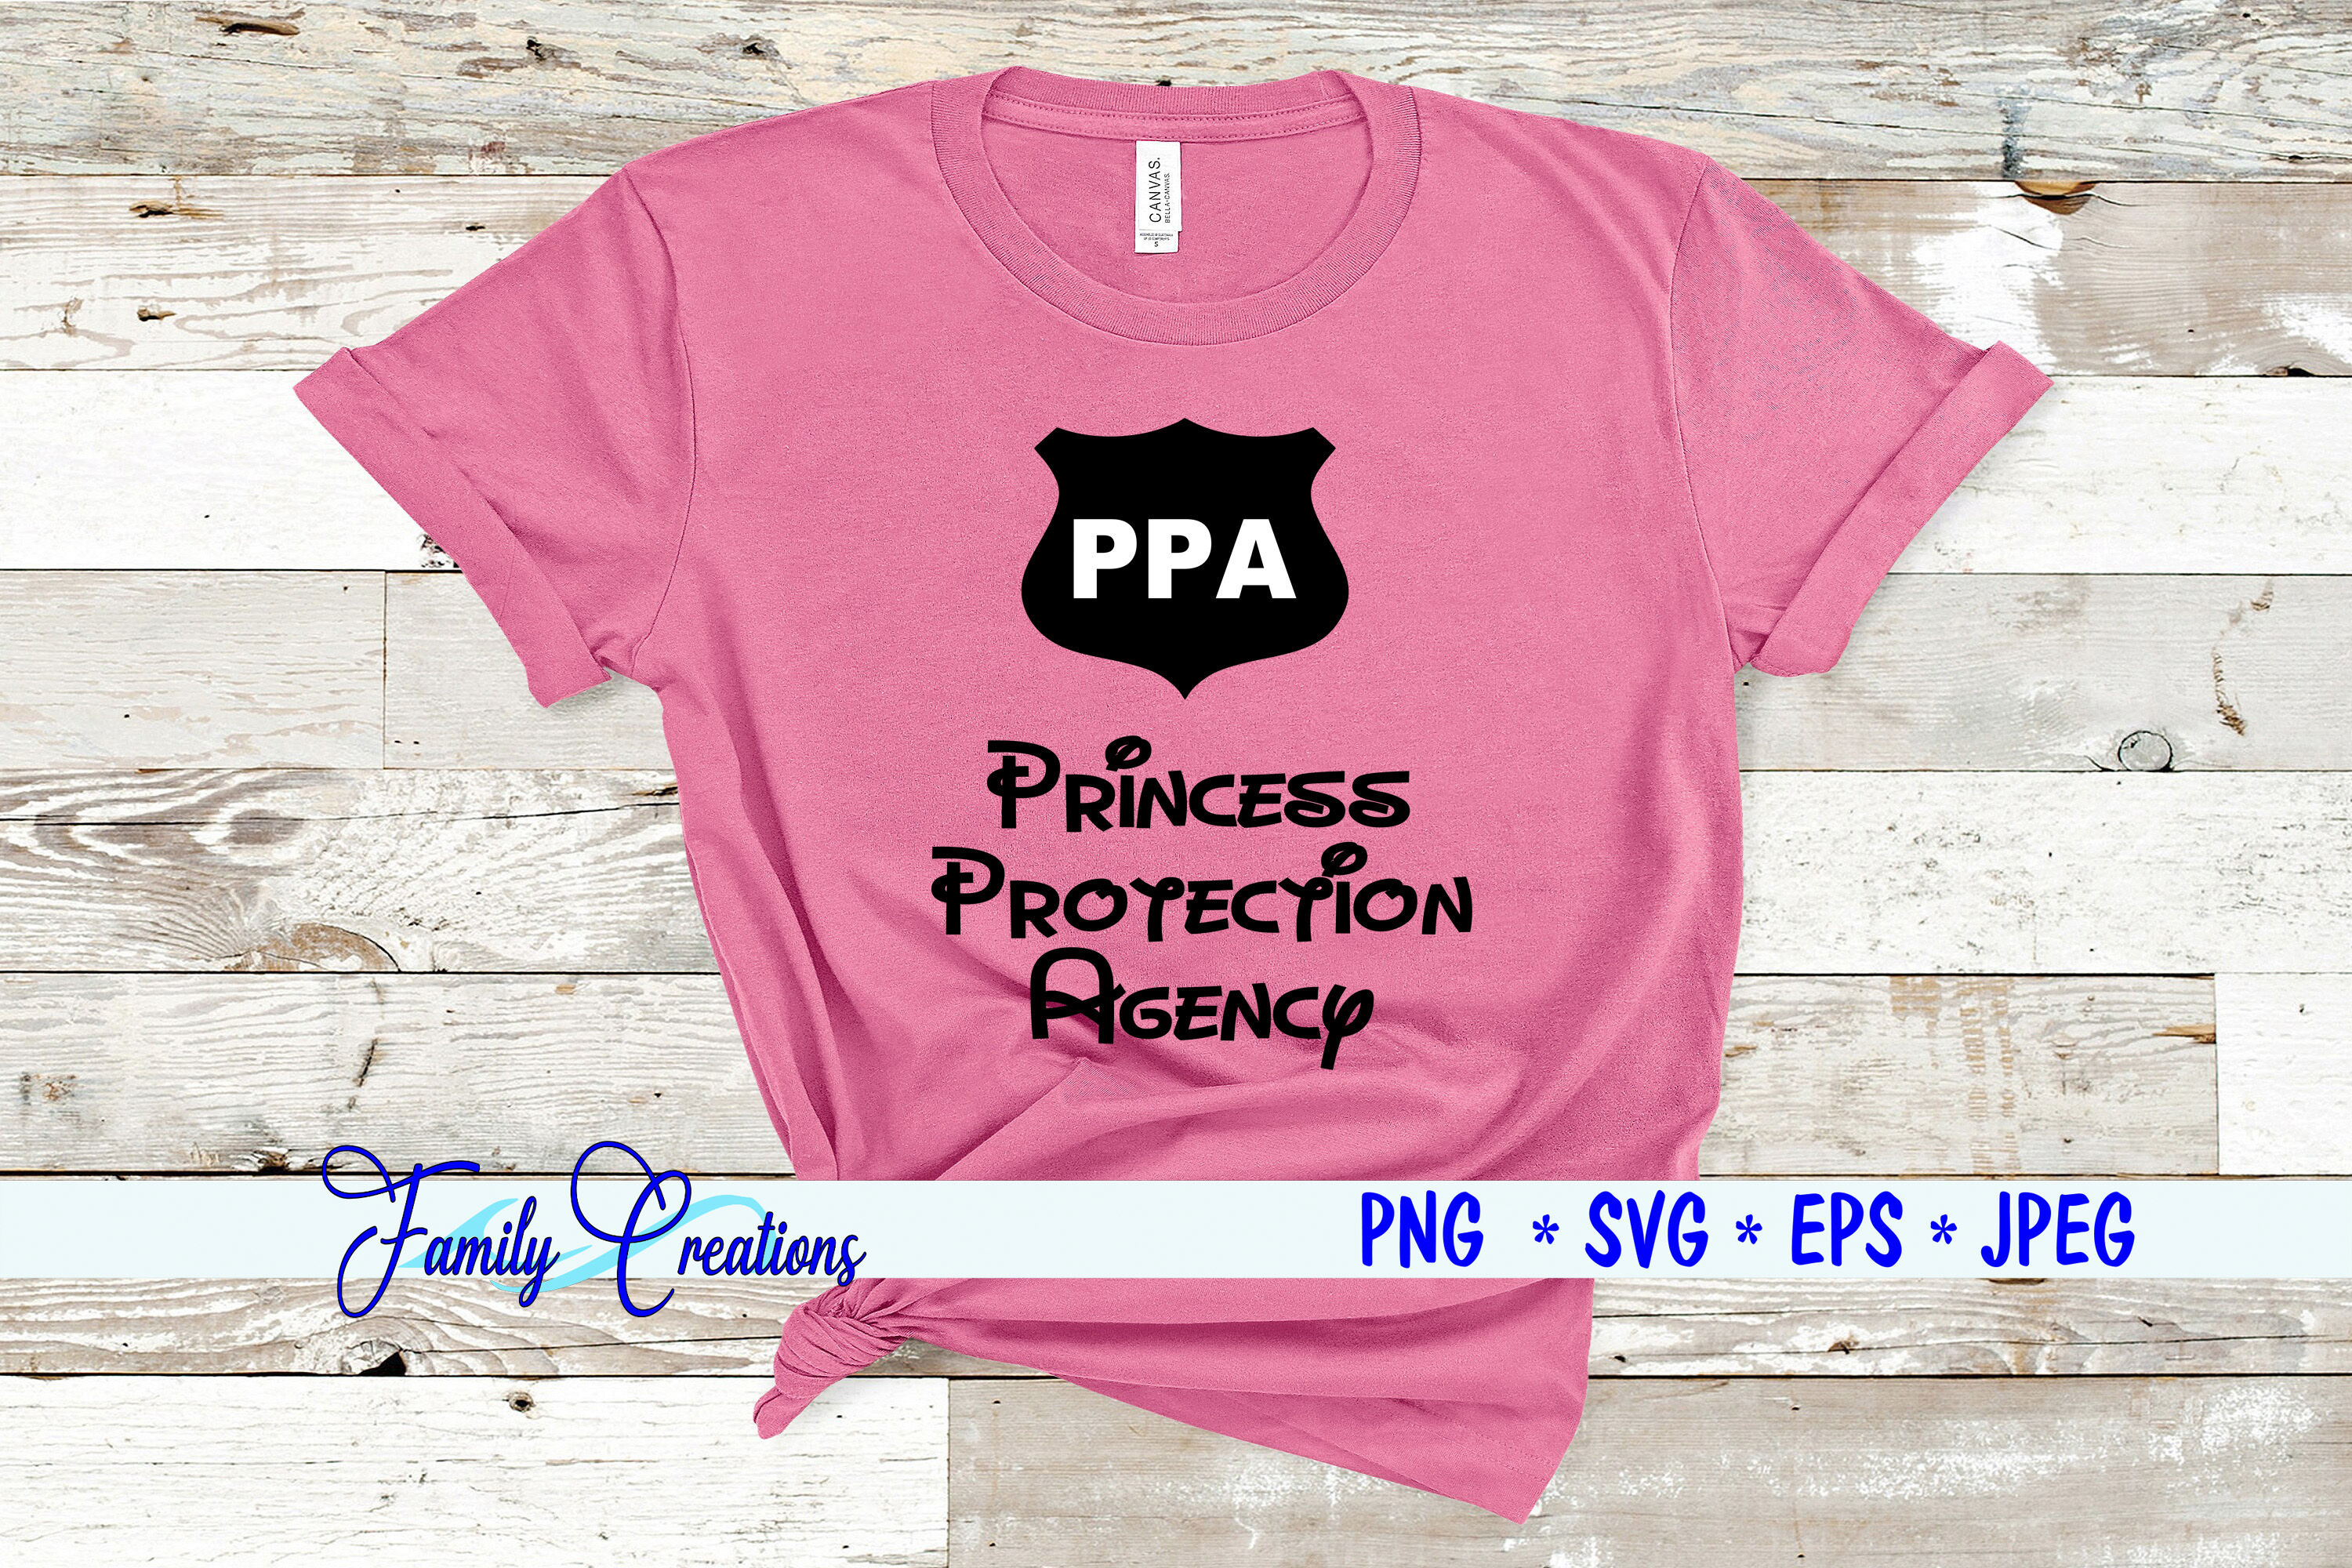 Download Ppa Princess Protection Agency By Family Creations Thehungryjpeg Com